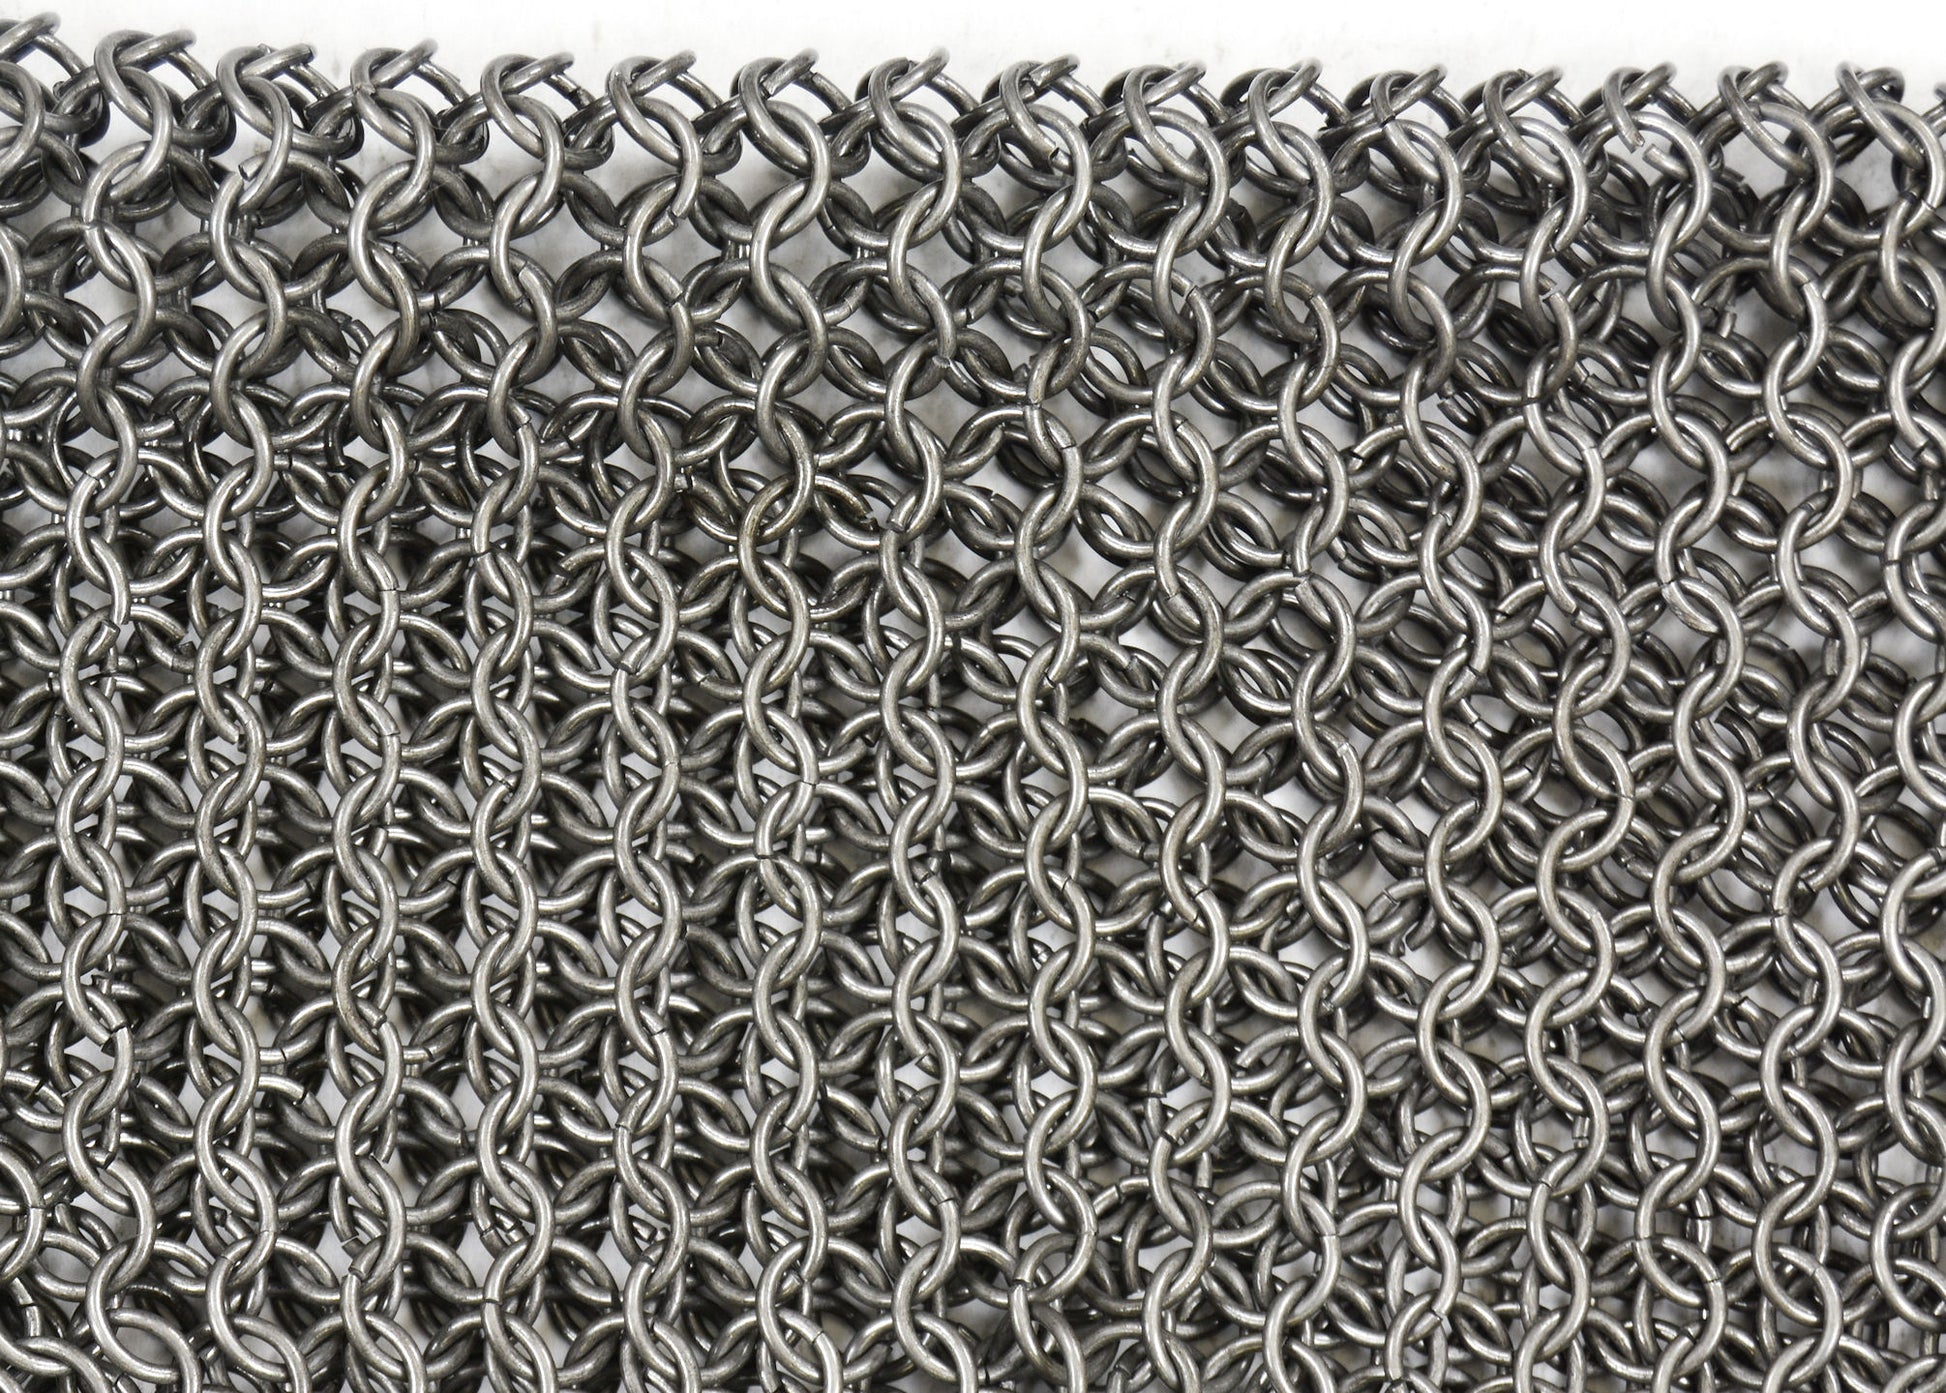 BRNH Chainmail Sleeve and Shoulder Panels - Butted High Tensile Wire Rings